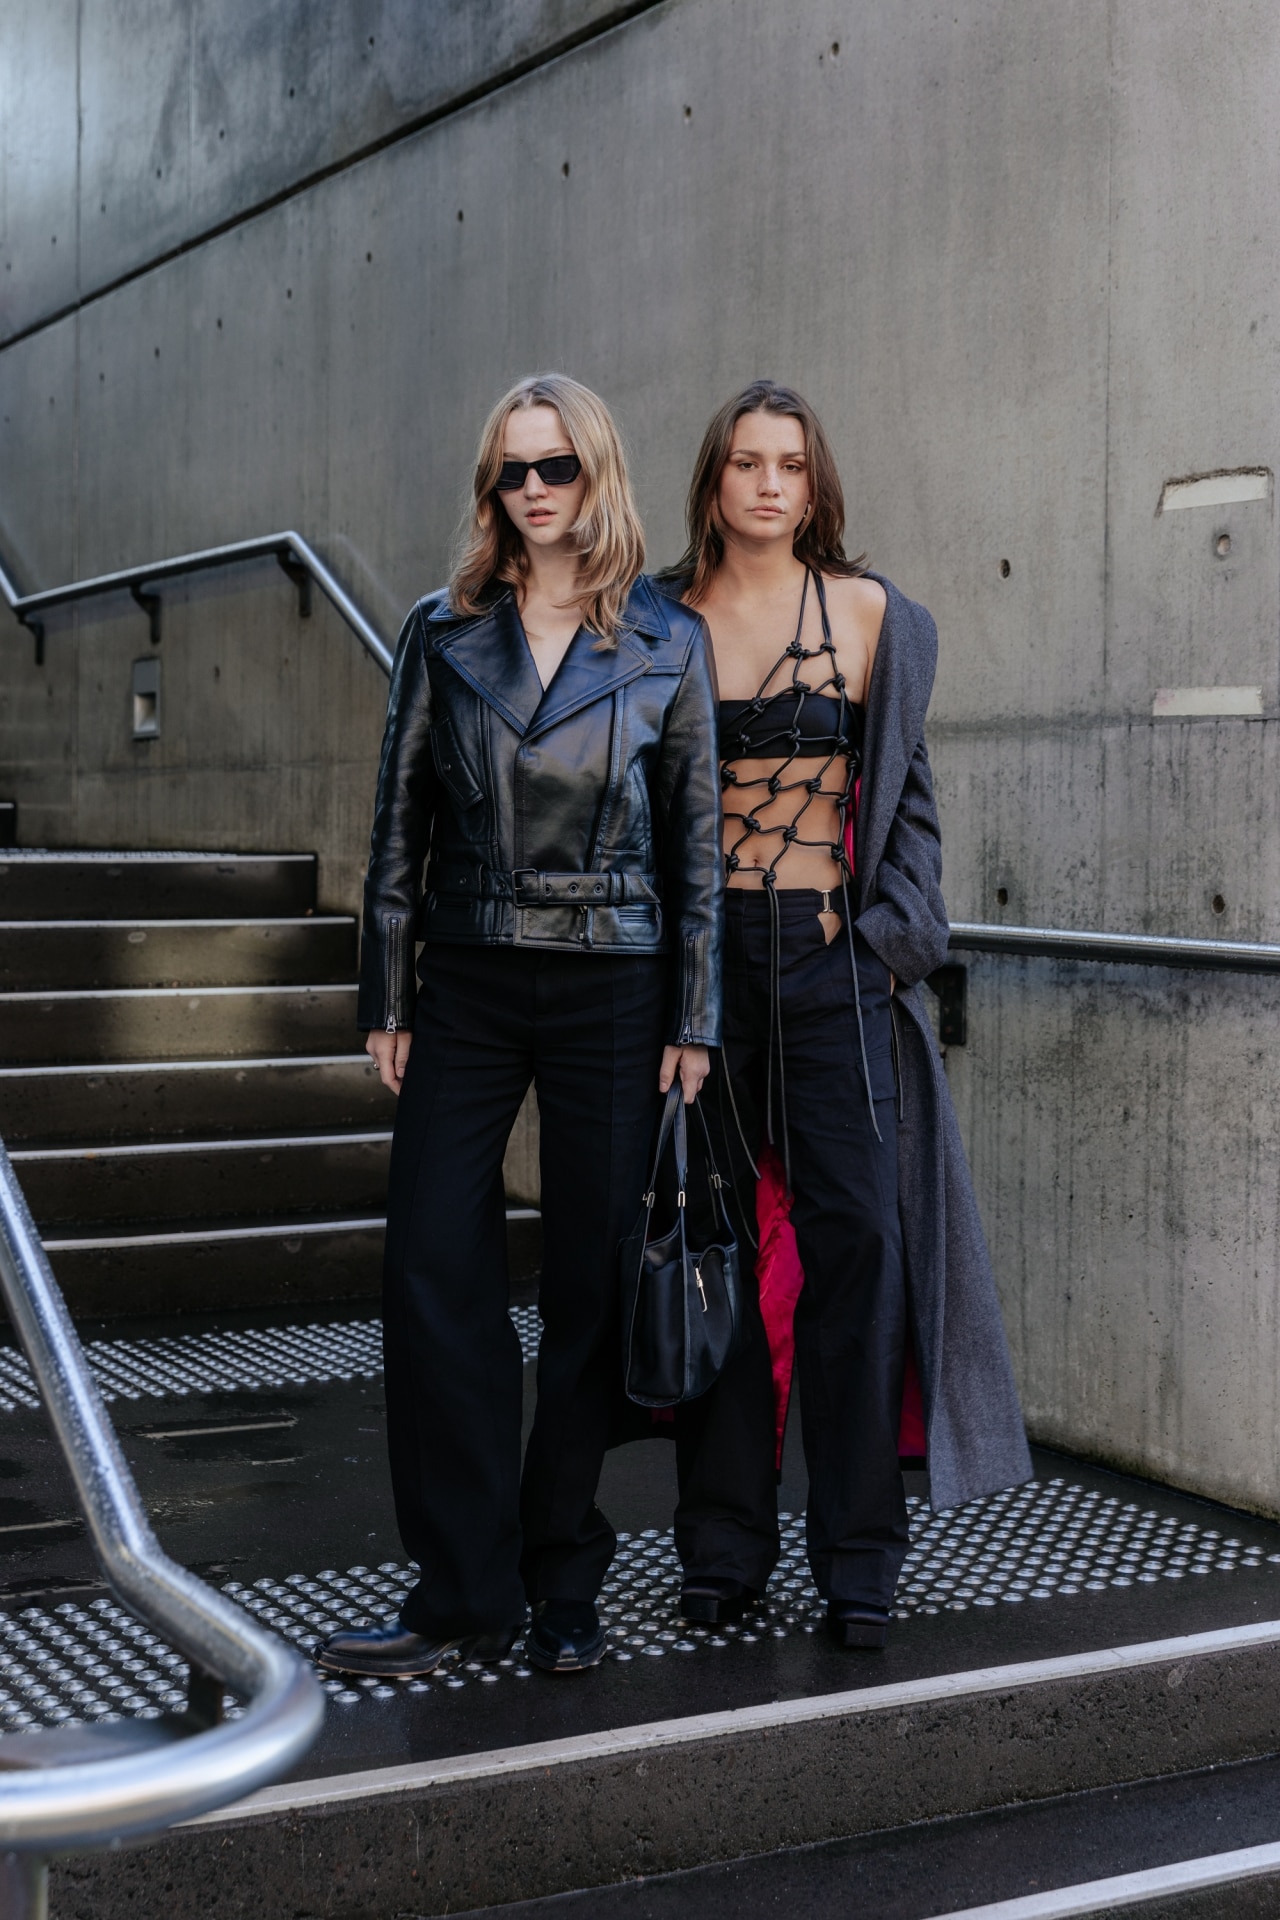 The Best Style From Afterpay Australian Fashion Week 2023 | The Mercury